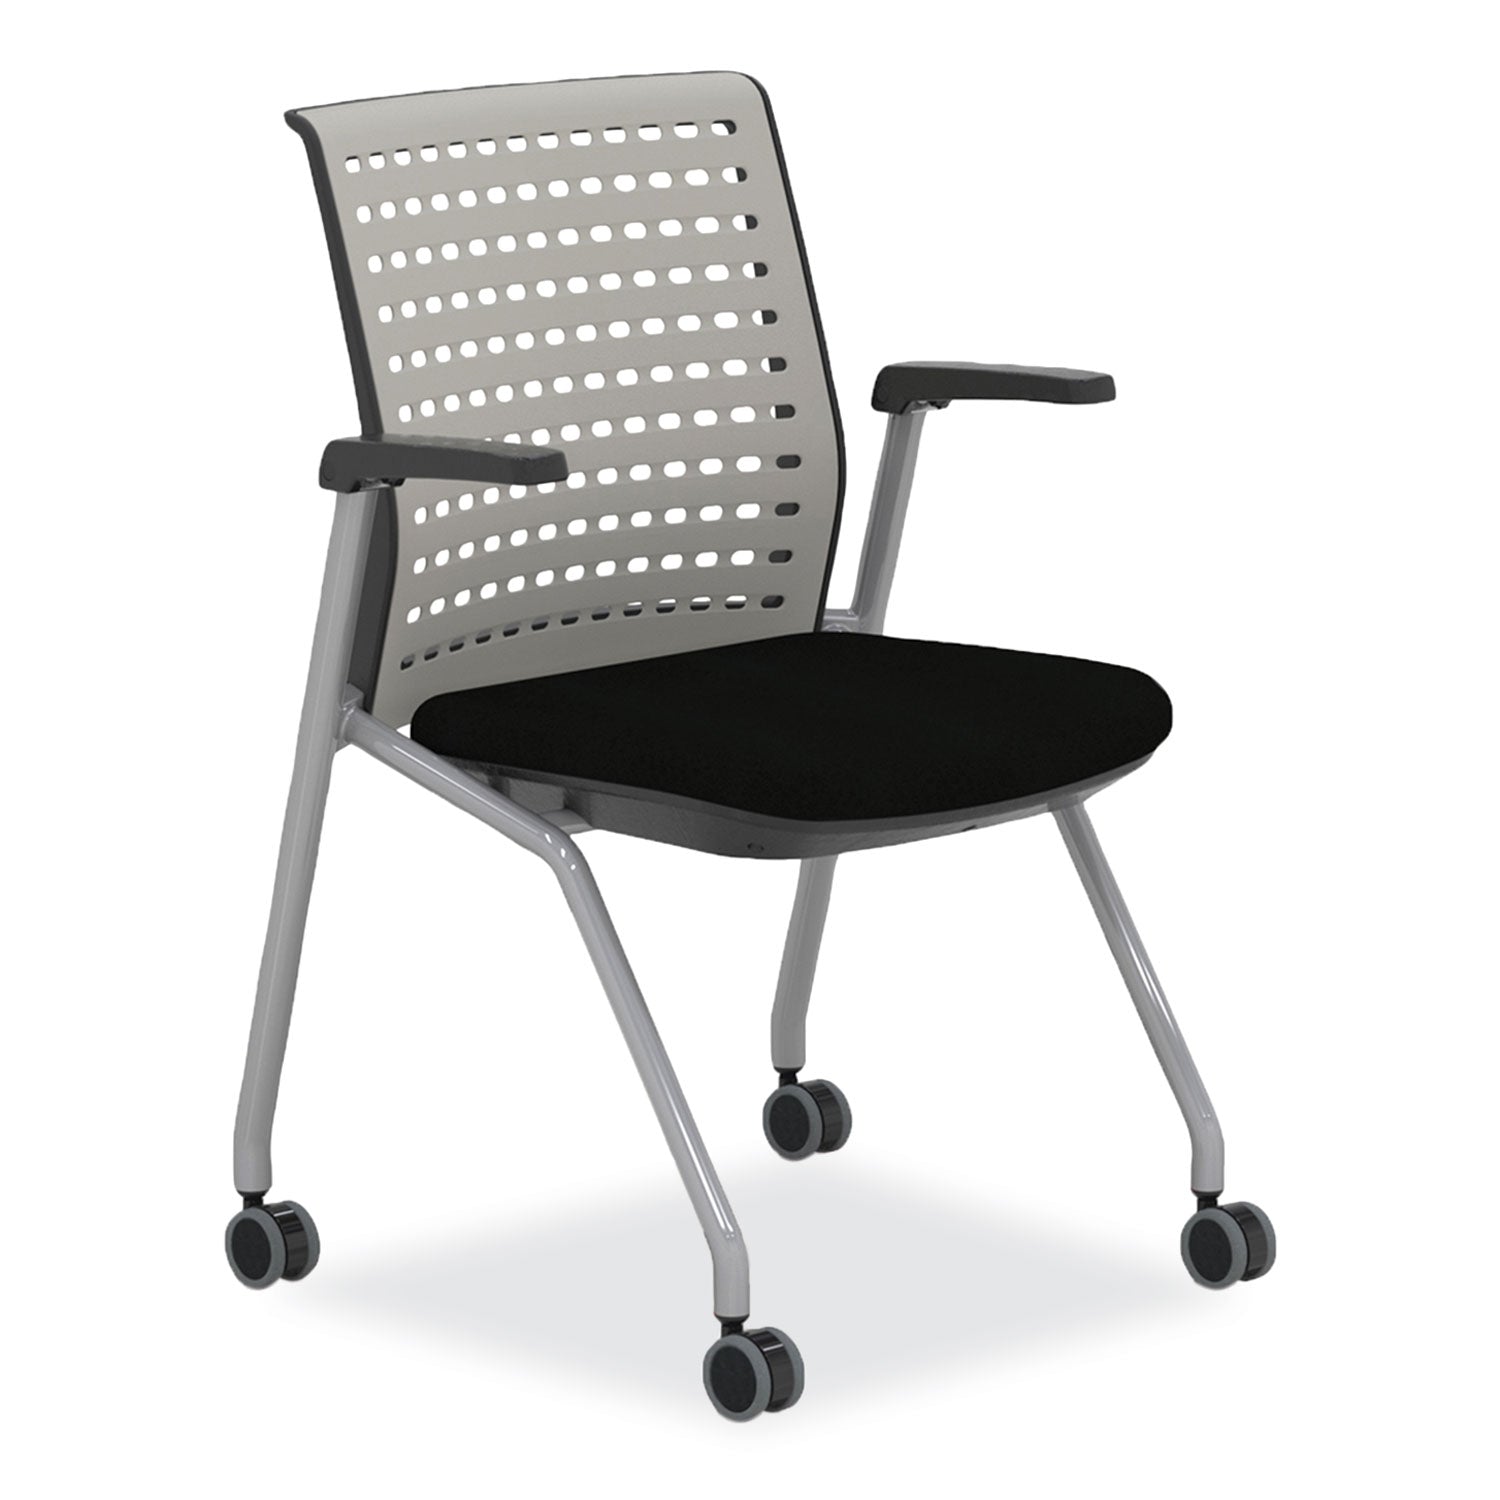 thesis-training-chair-w-static-back-and-arms-max-250-lb-18-high-black-seatgray-back-base2-ctships-in-1-3-business-days_safkts1sgblk - 1